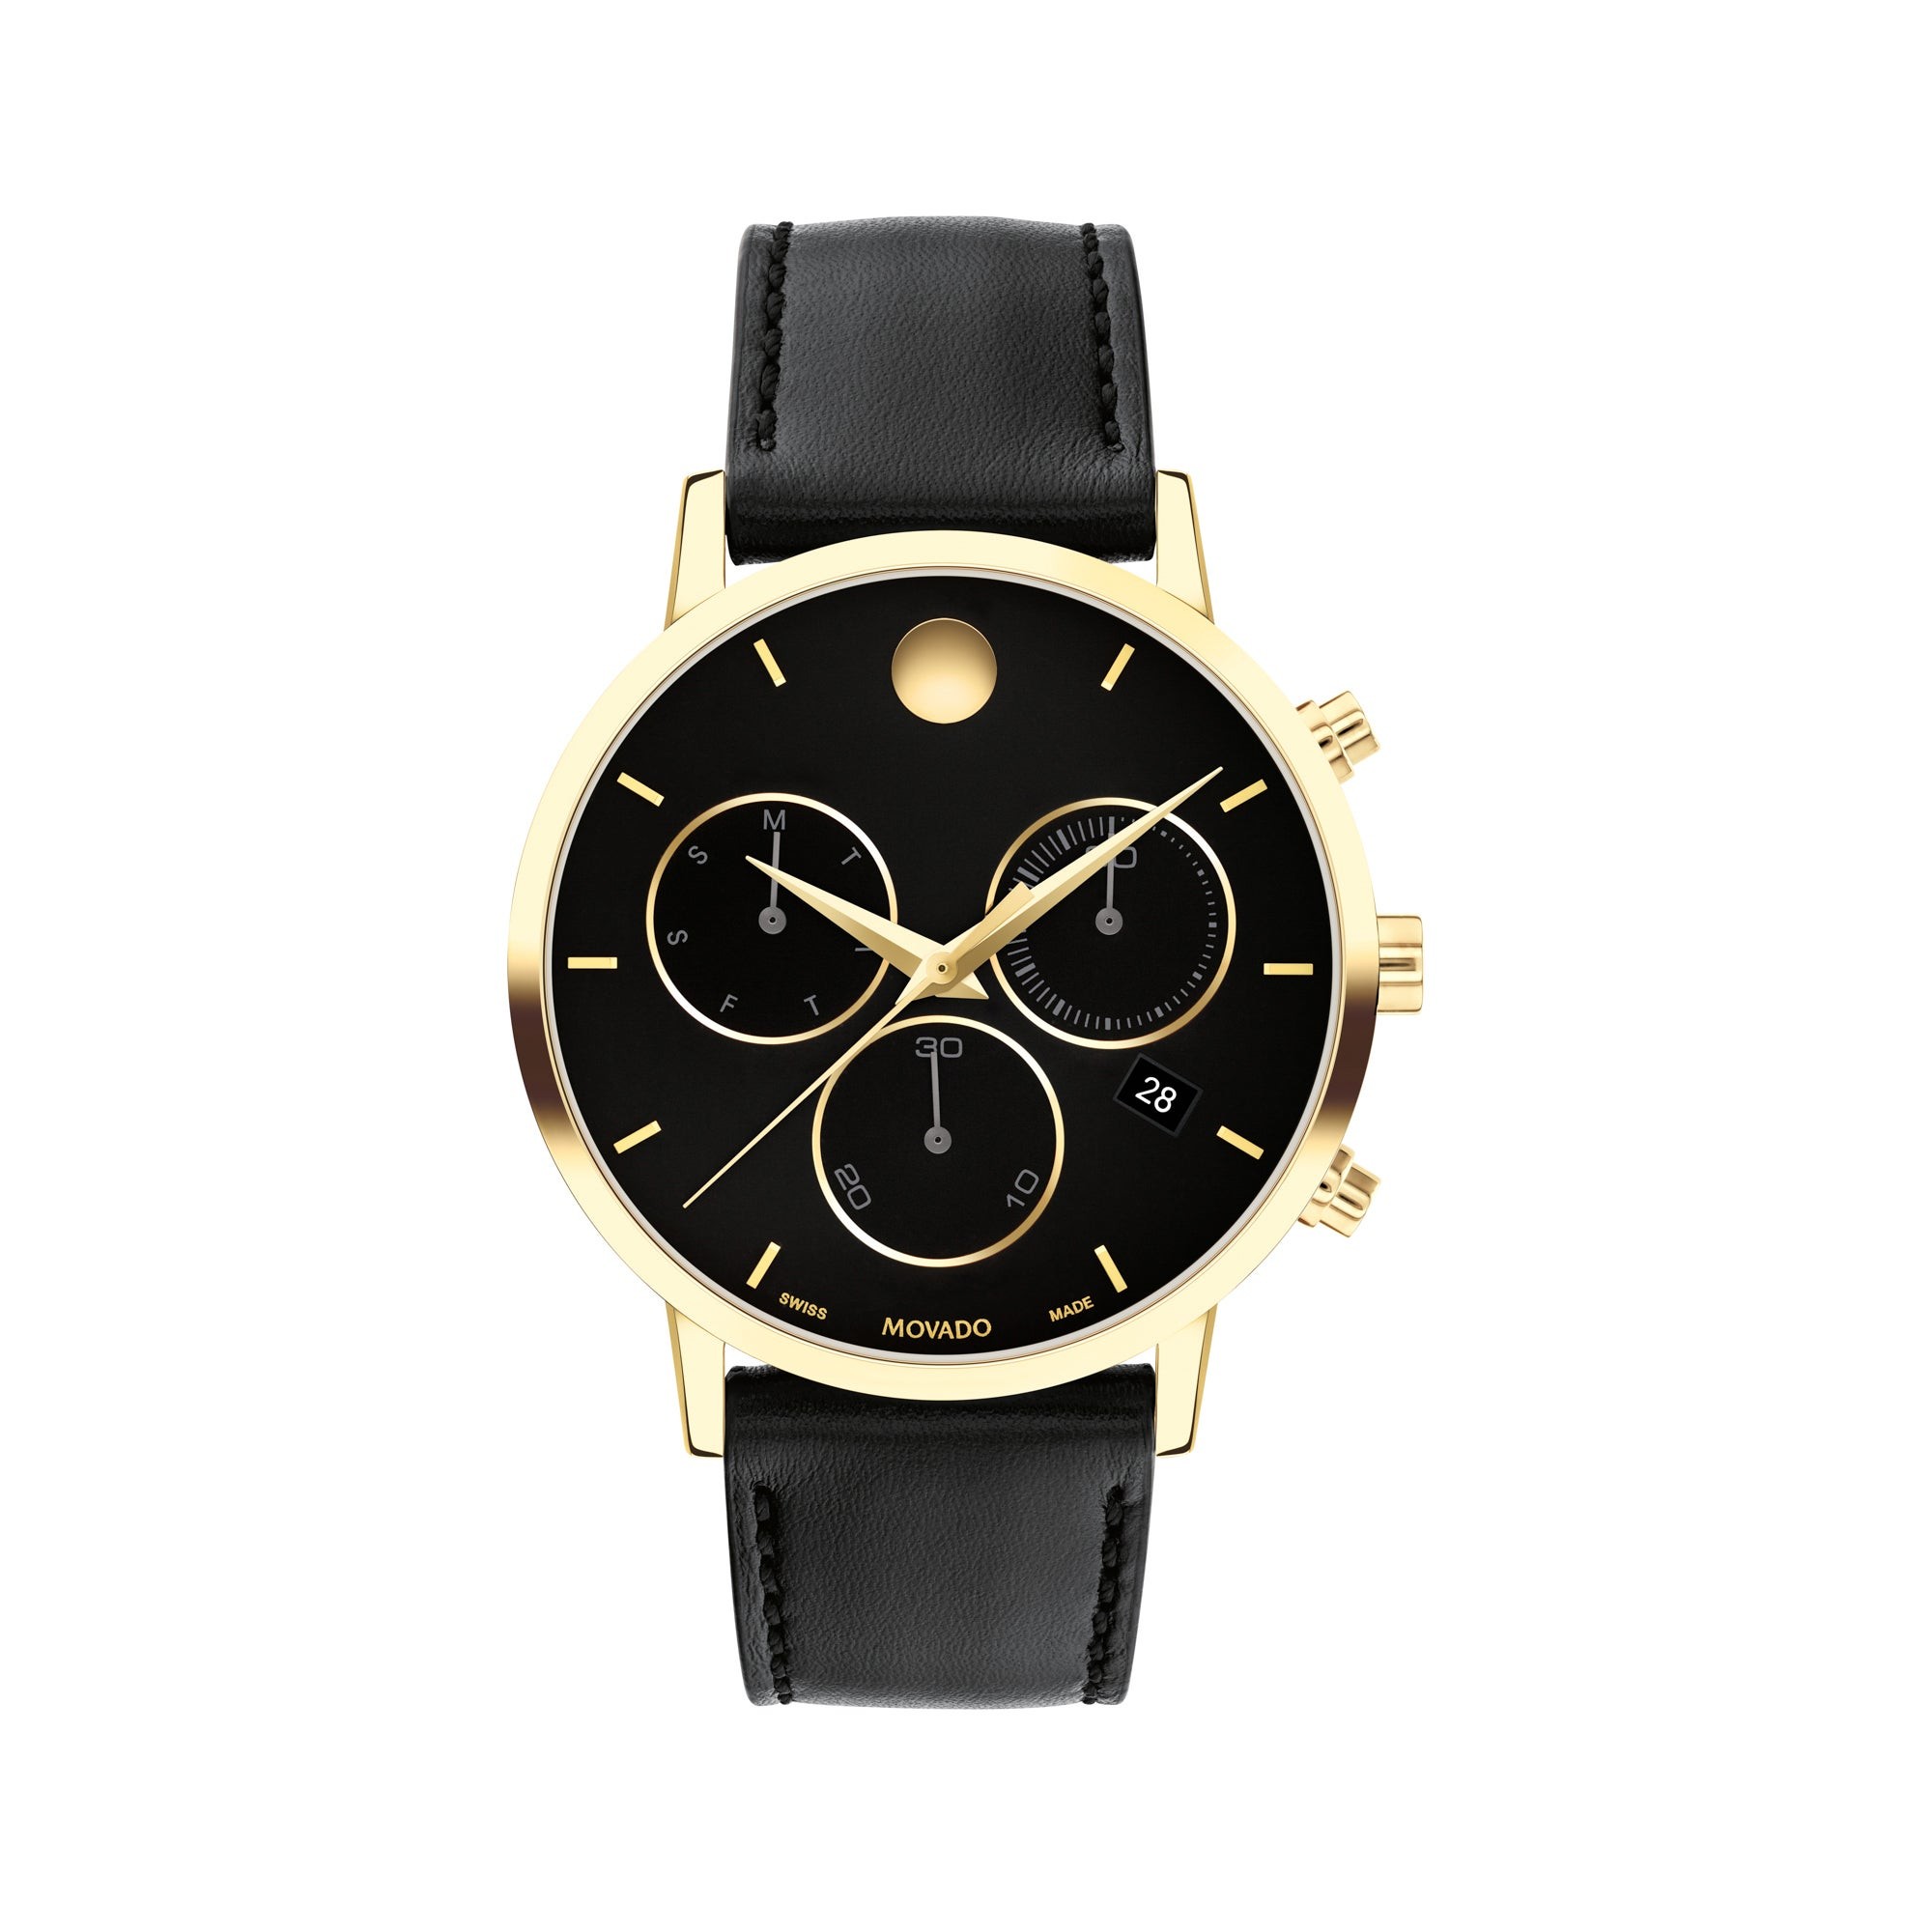 Men's Museum Classic Chronograph Gold & Black Leather Strap Watch, Black Dial